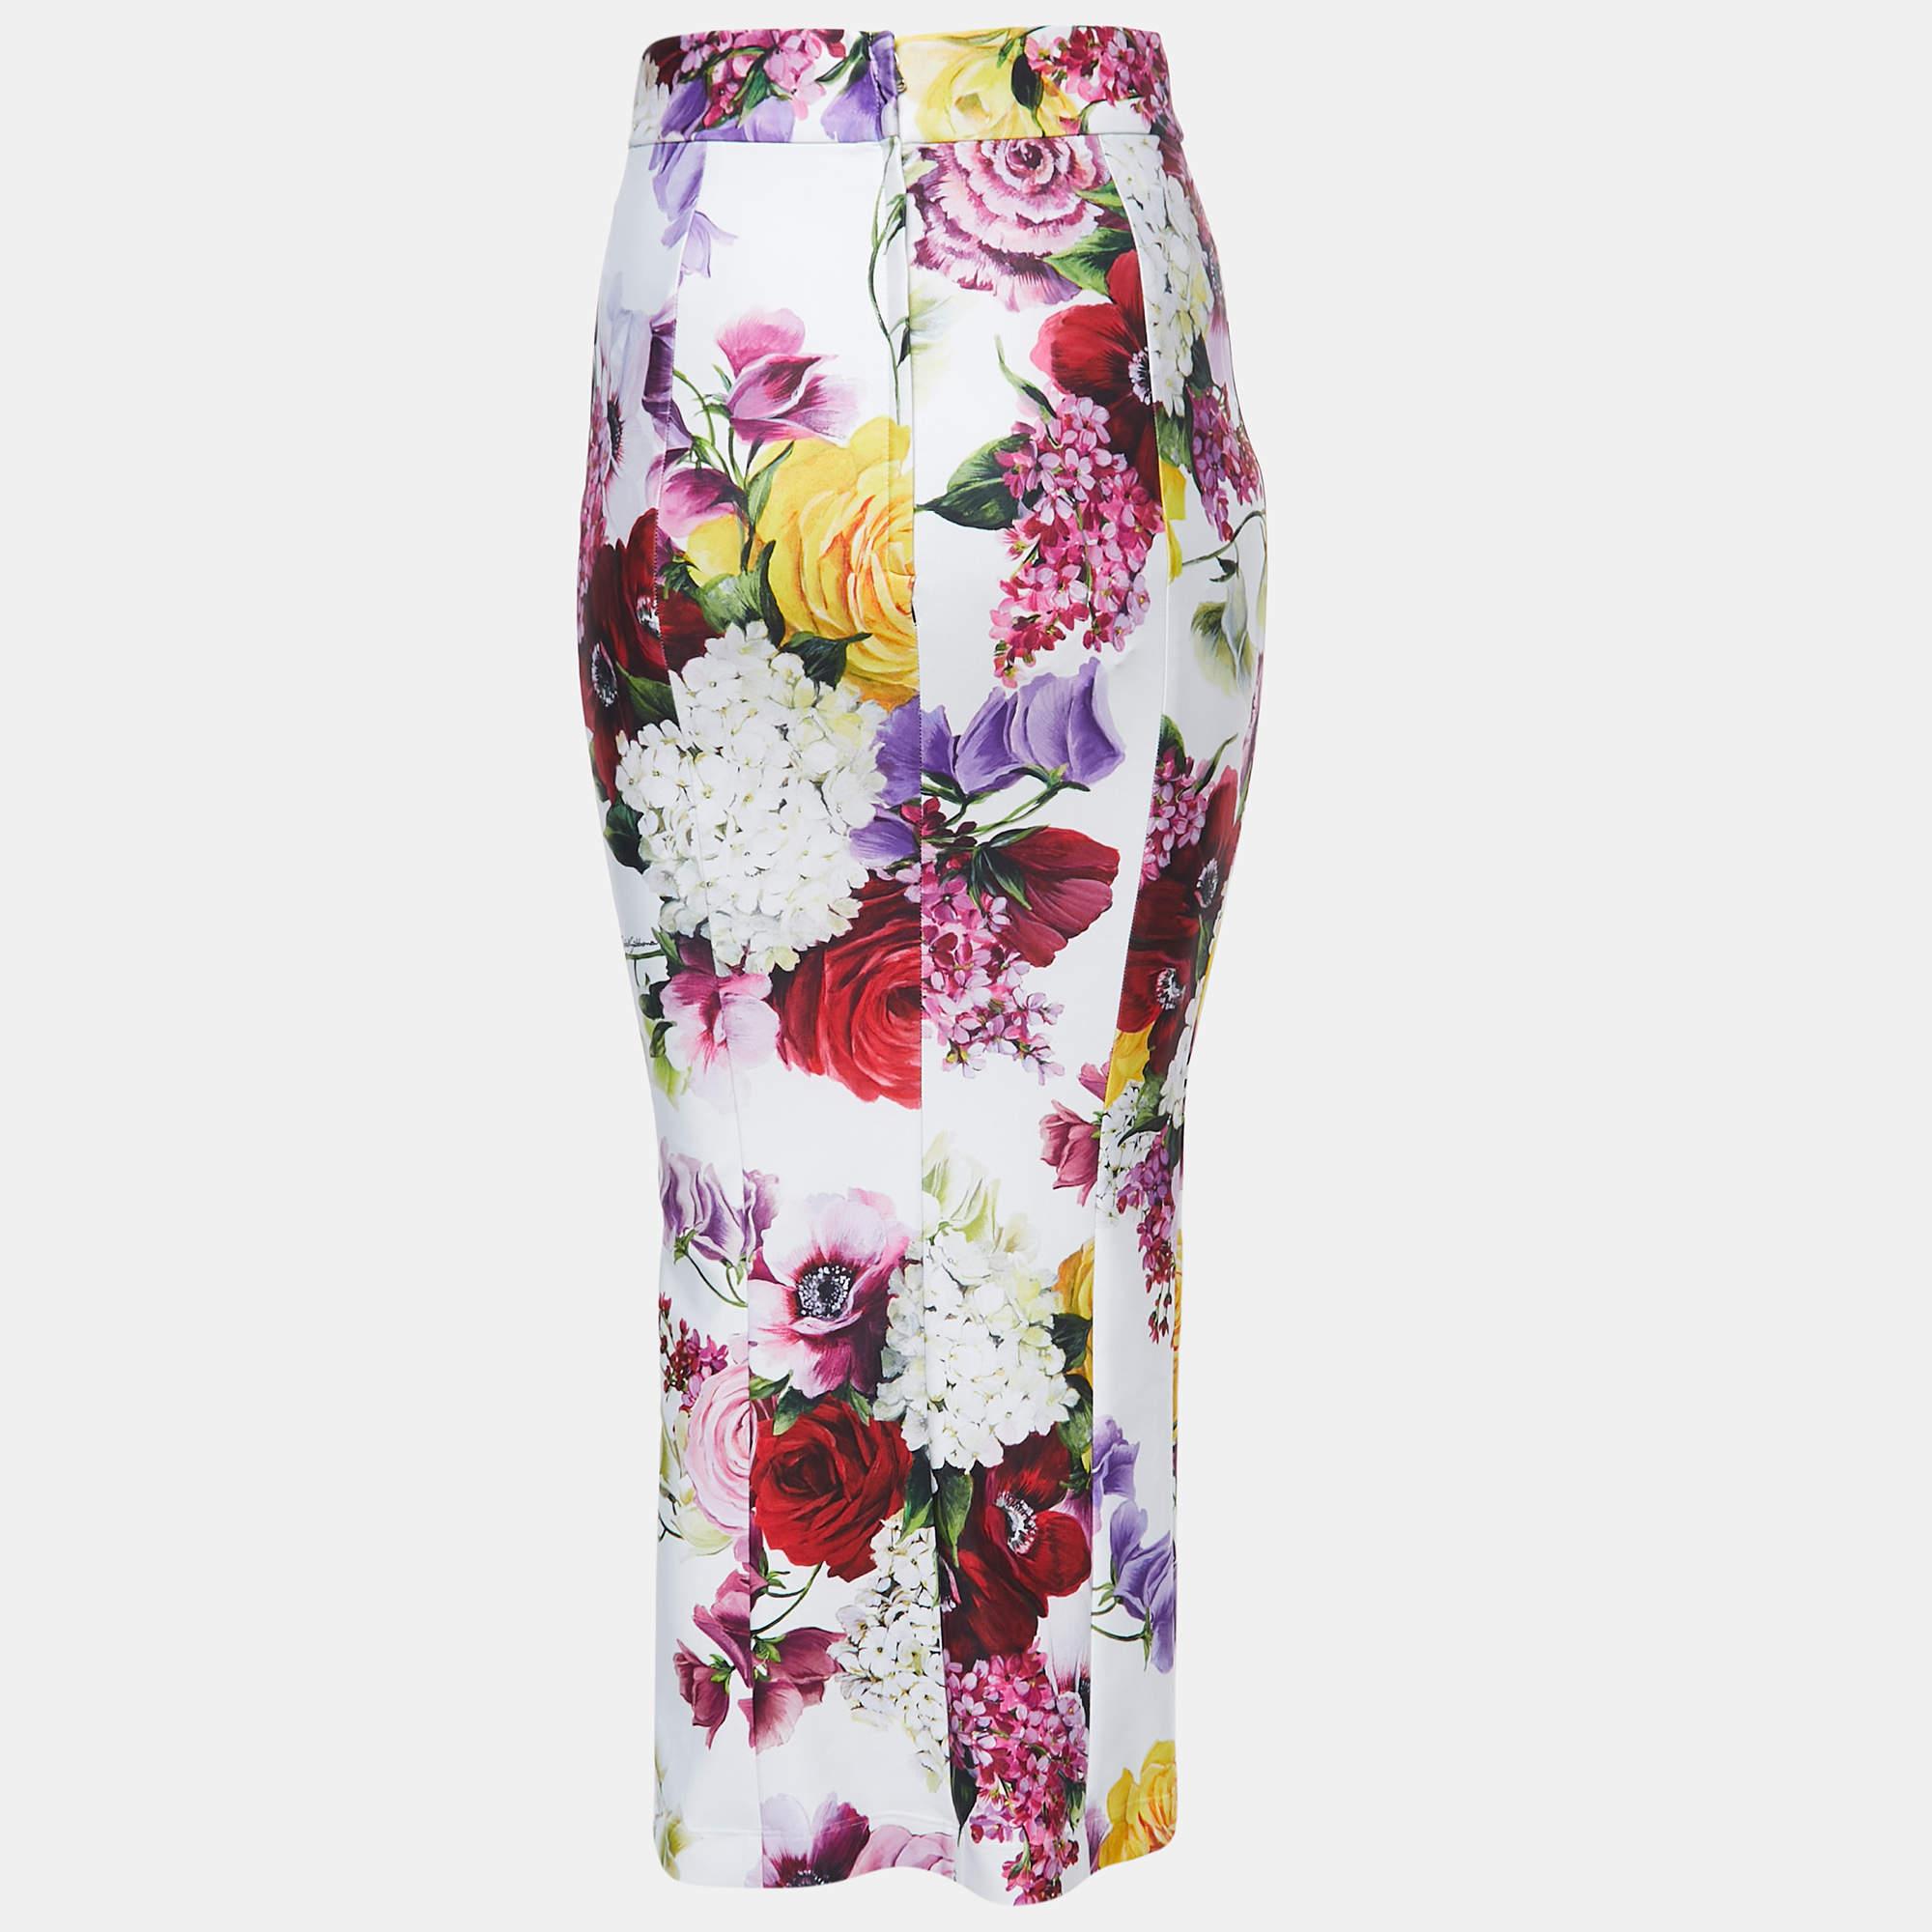 Refresh your summer wardrobe by adding this beautiful skirt from Dolce & Gabbana. Creatively made and featuring a poised style, this skirt will make you look absolutely elegant.

